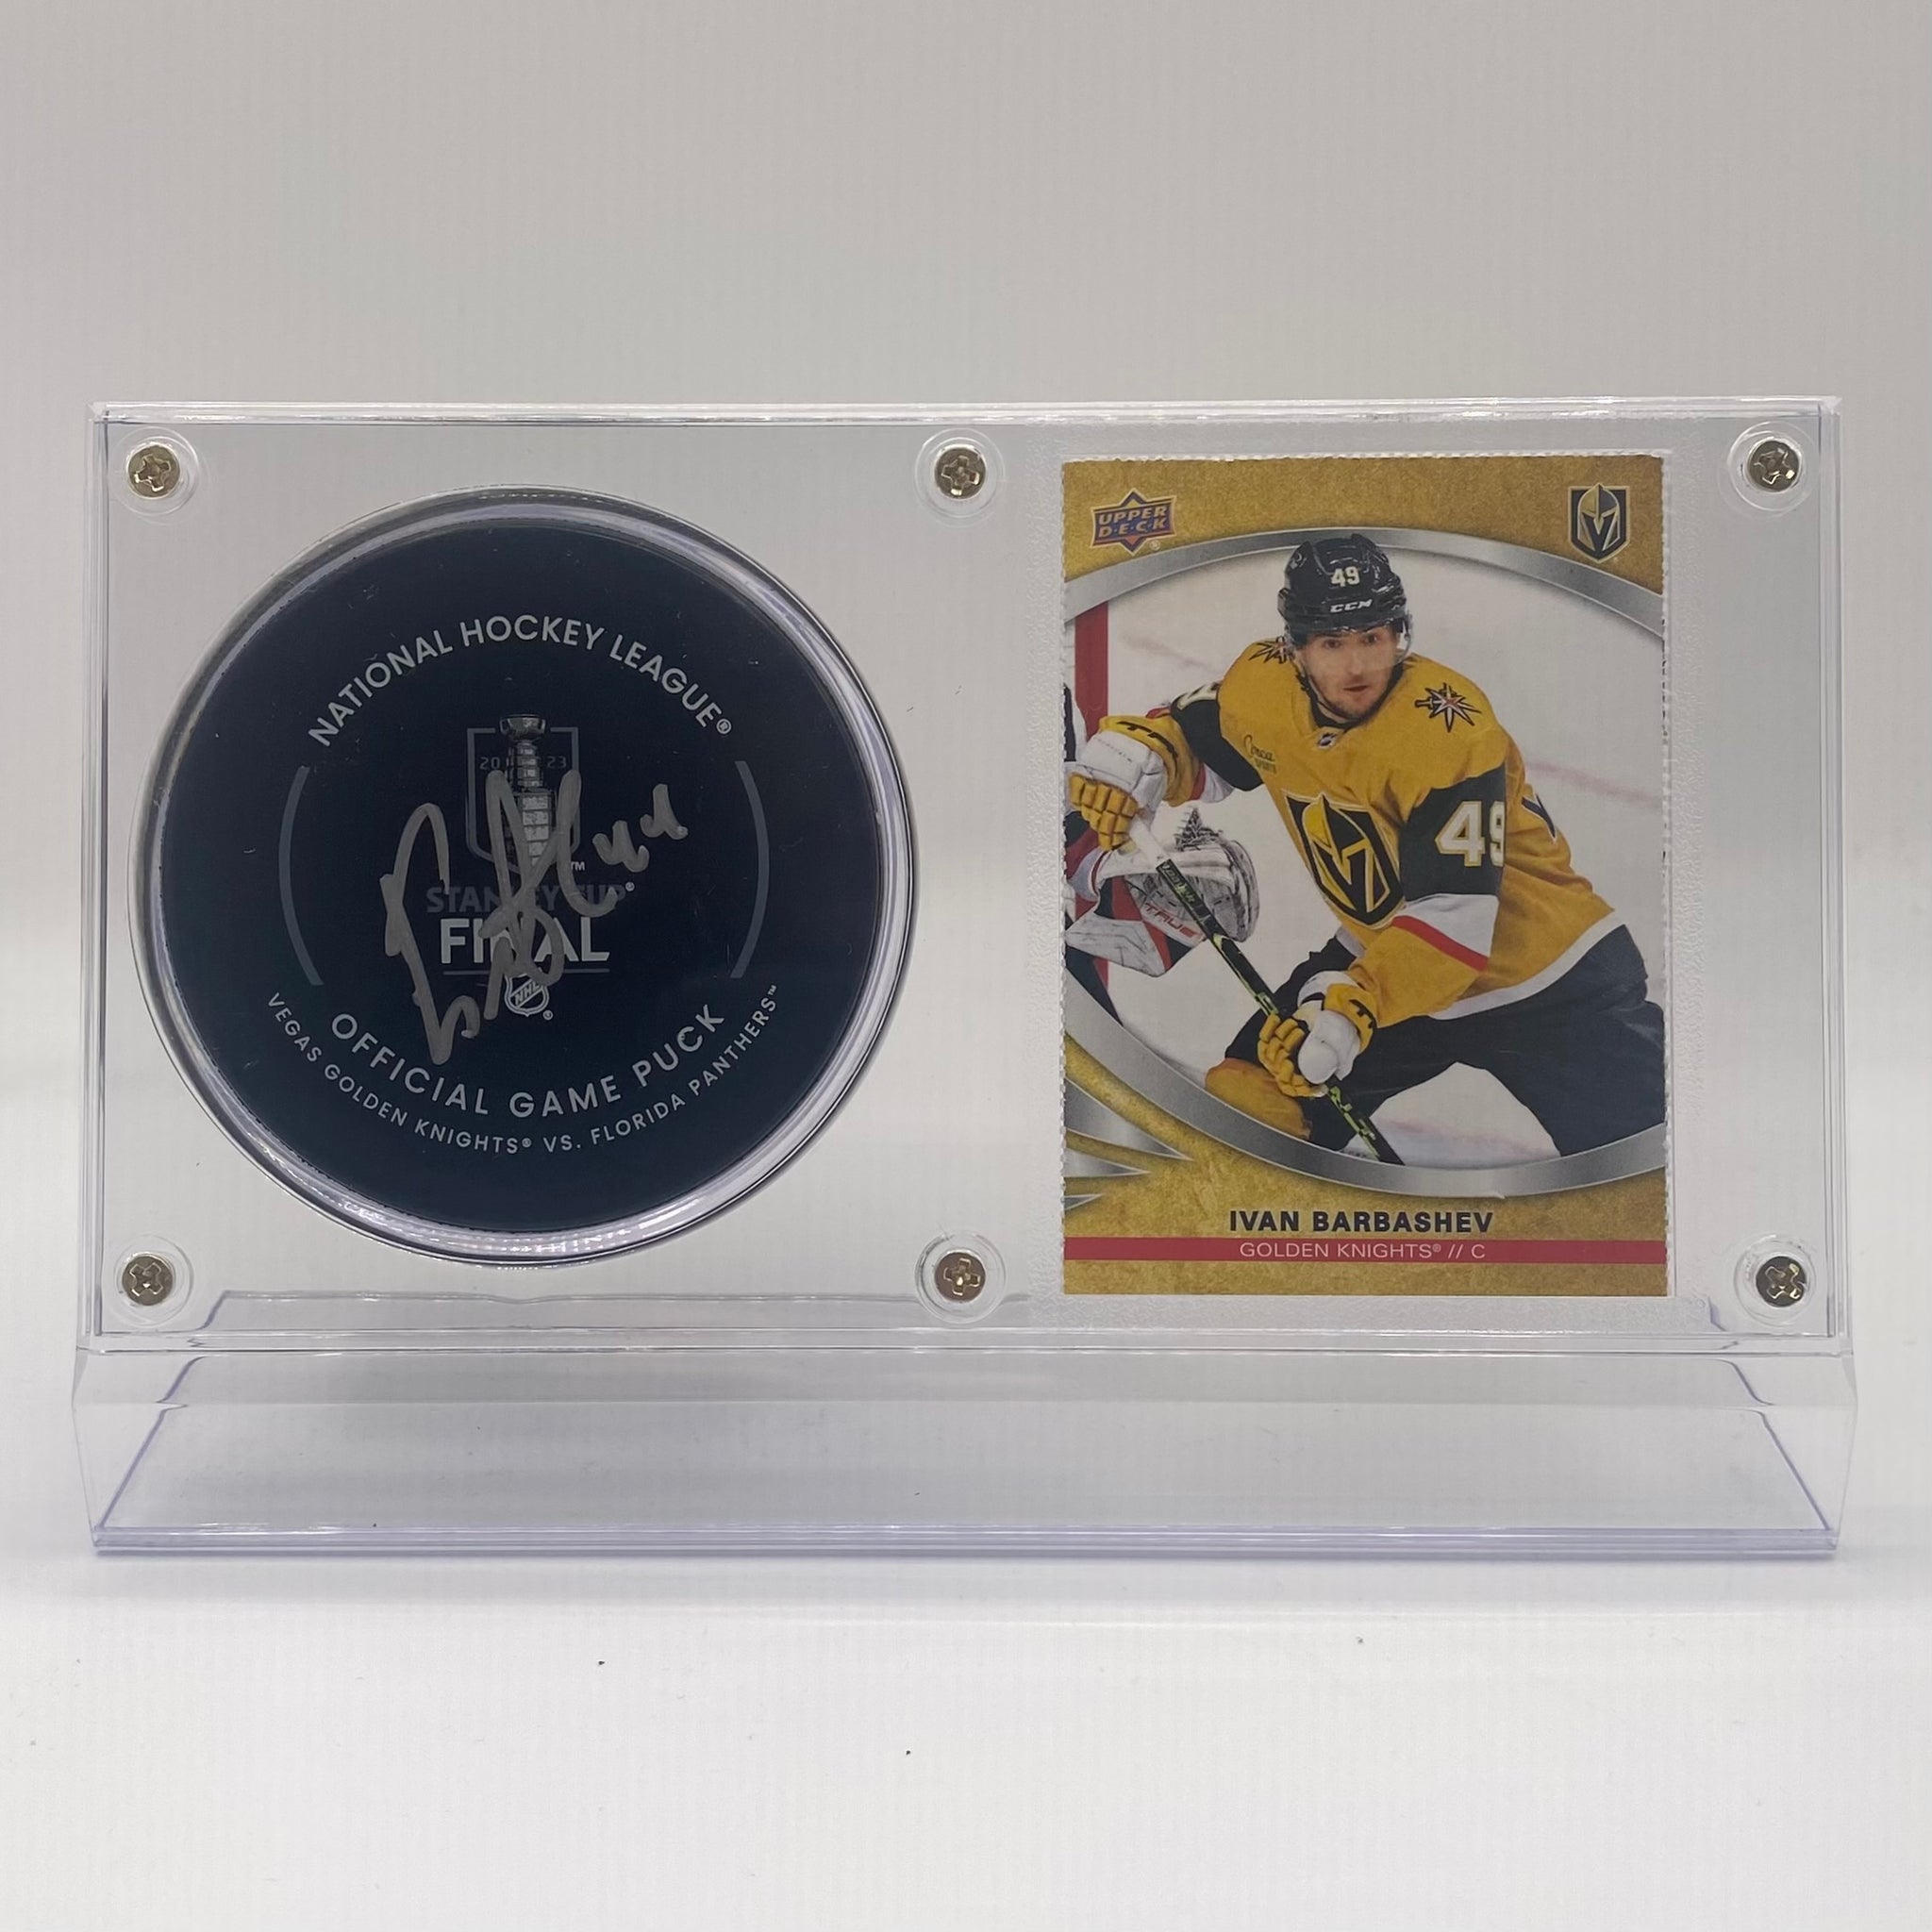 Ivan Barbashev Vegas Golden Knights Stanley Cup Champions Autographed Hockey Puck and Trading Card Case